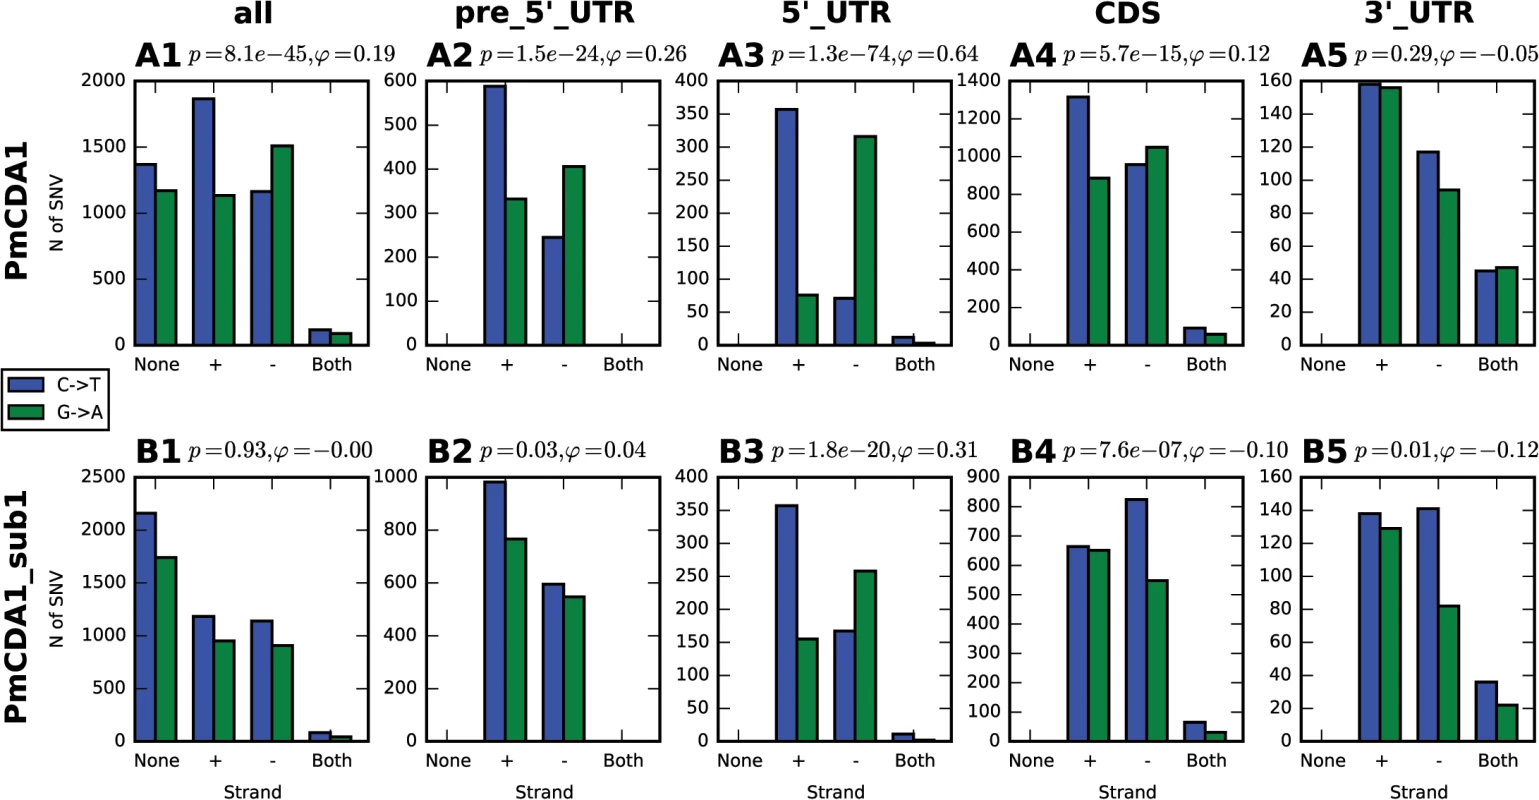 Analysis of strand-specificity of mutations reveals the predominant deamination of non-transcribed DNA strand and attenuation of this effect in strains defective in Sub1.